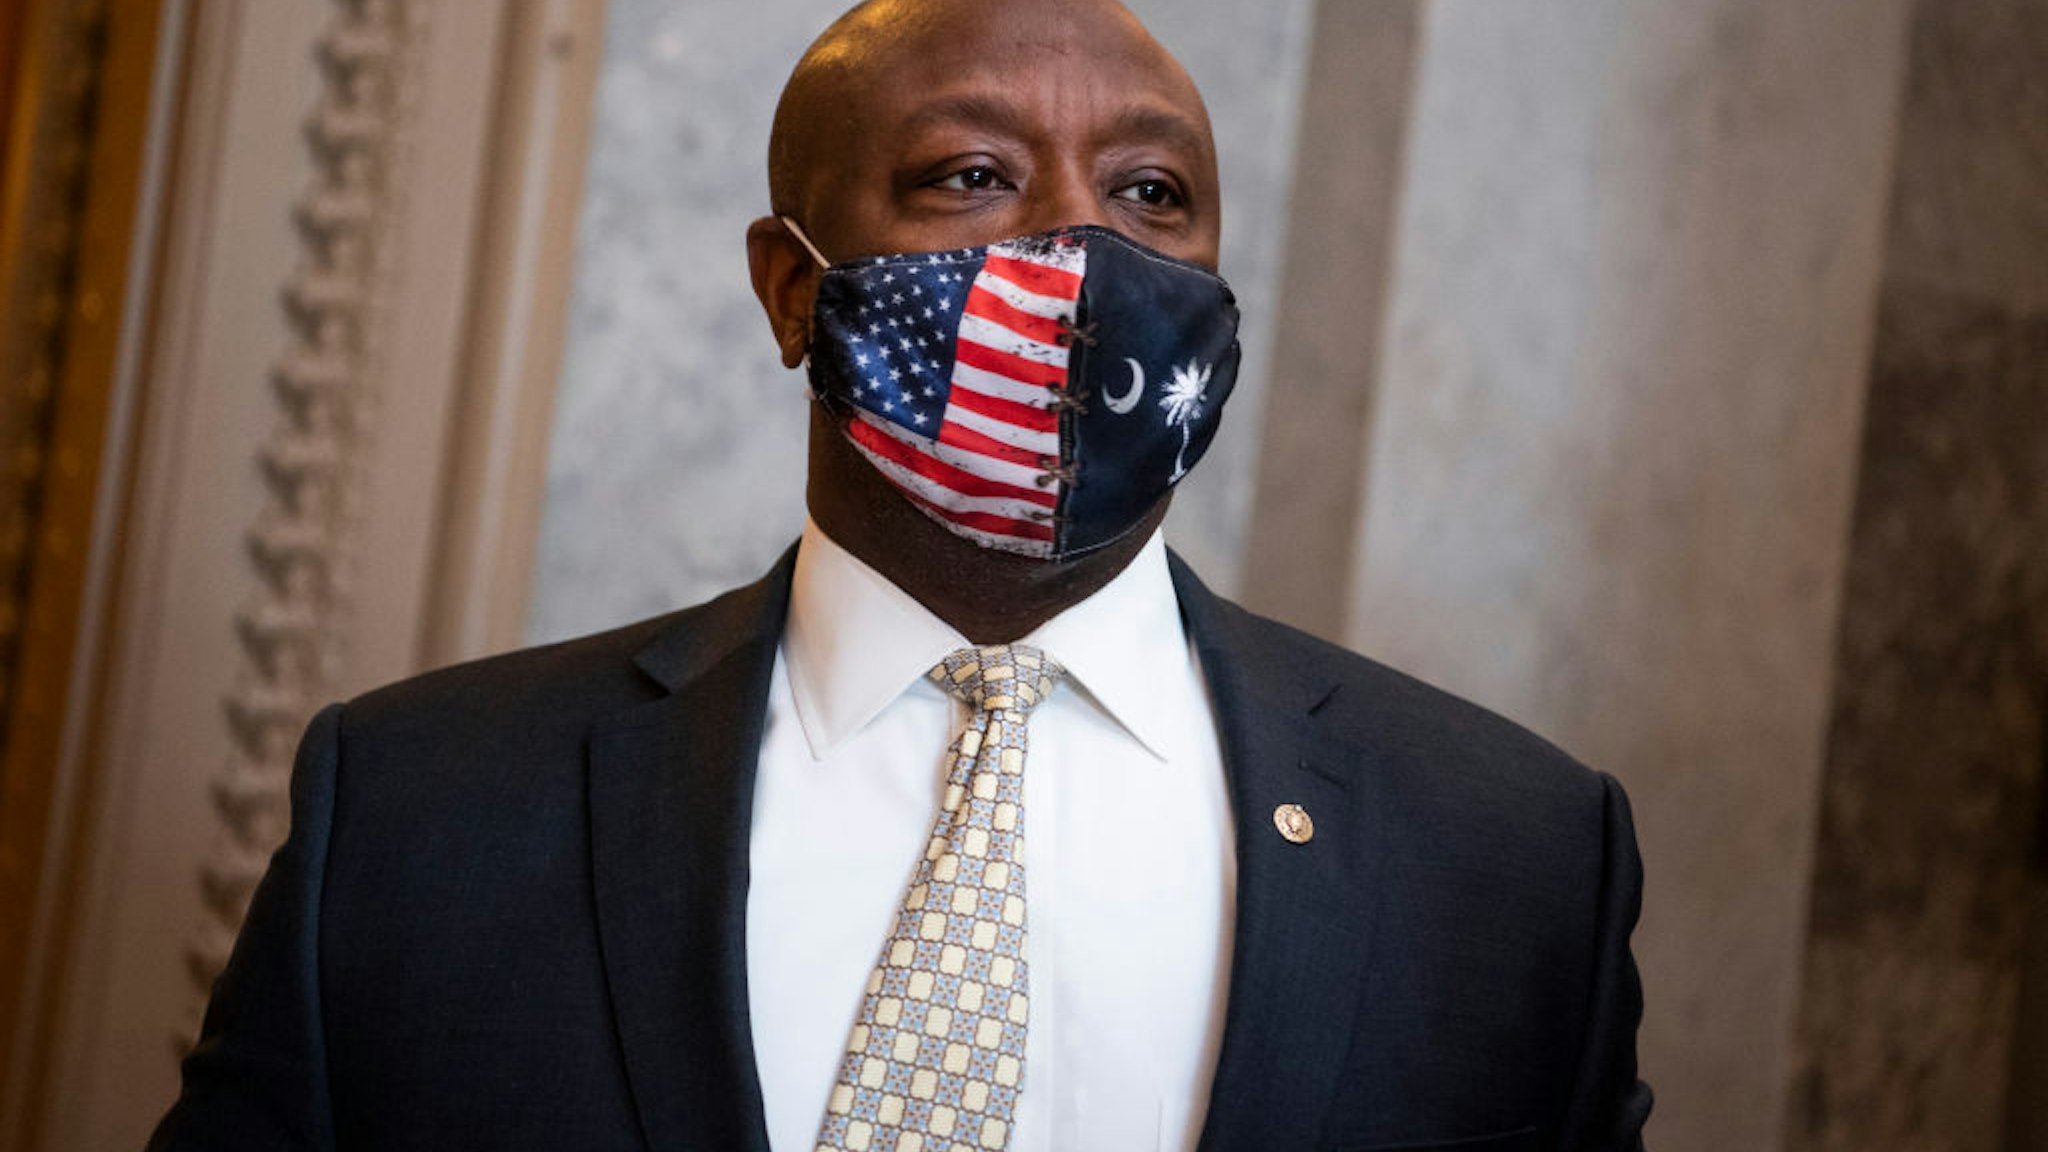 Sen. Tim Scott, R-S.C., is seen outside the chamber as the Senate votes to open debate on the coronavirus relief package on Thursday, March 4, 2021.